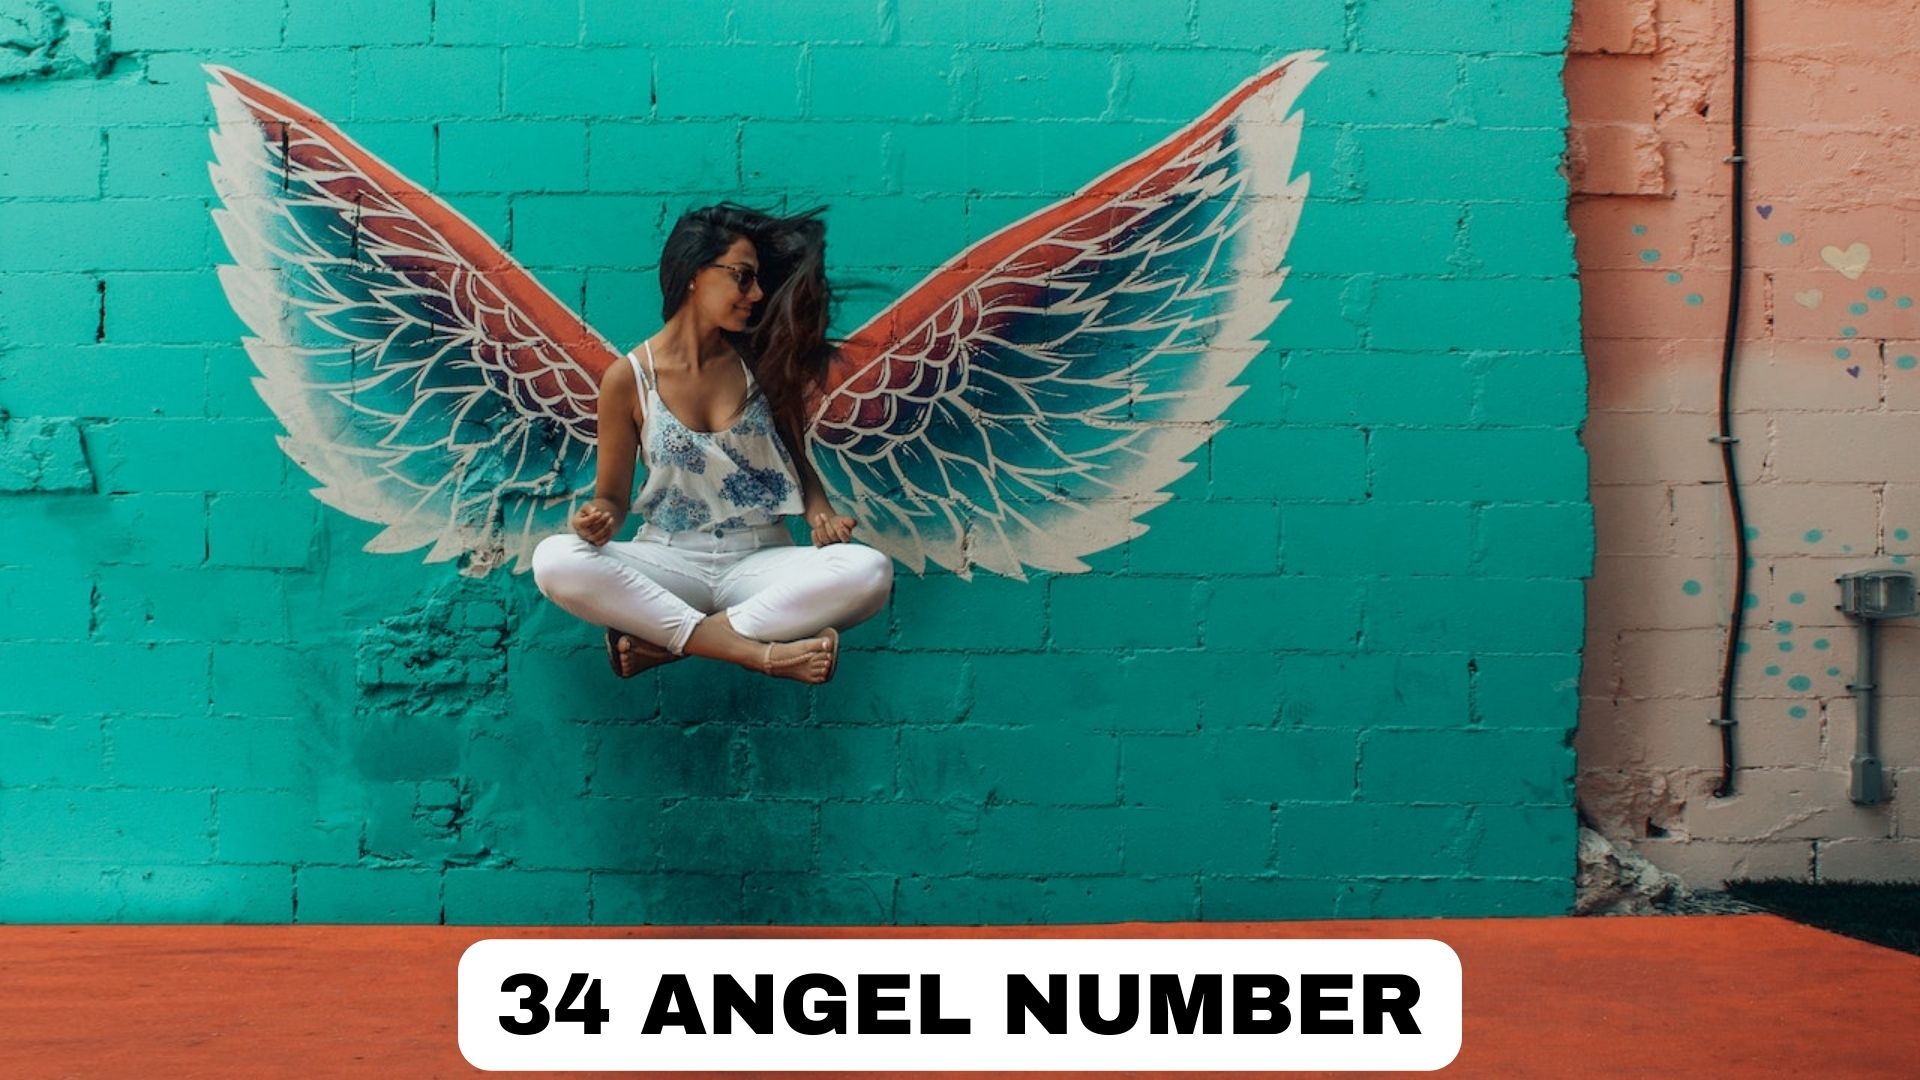 34 Angel Number - A Very Fortunate Number